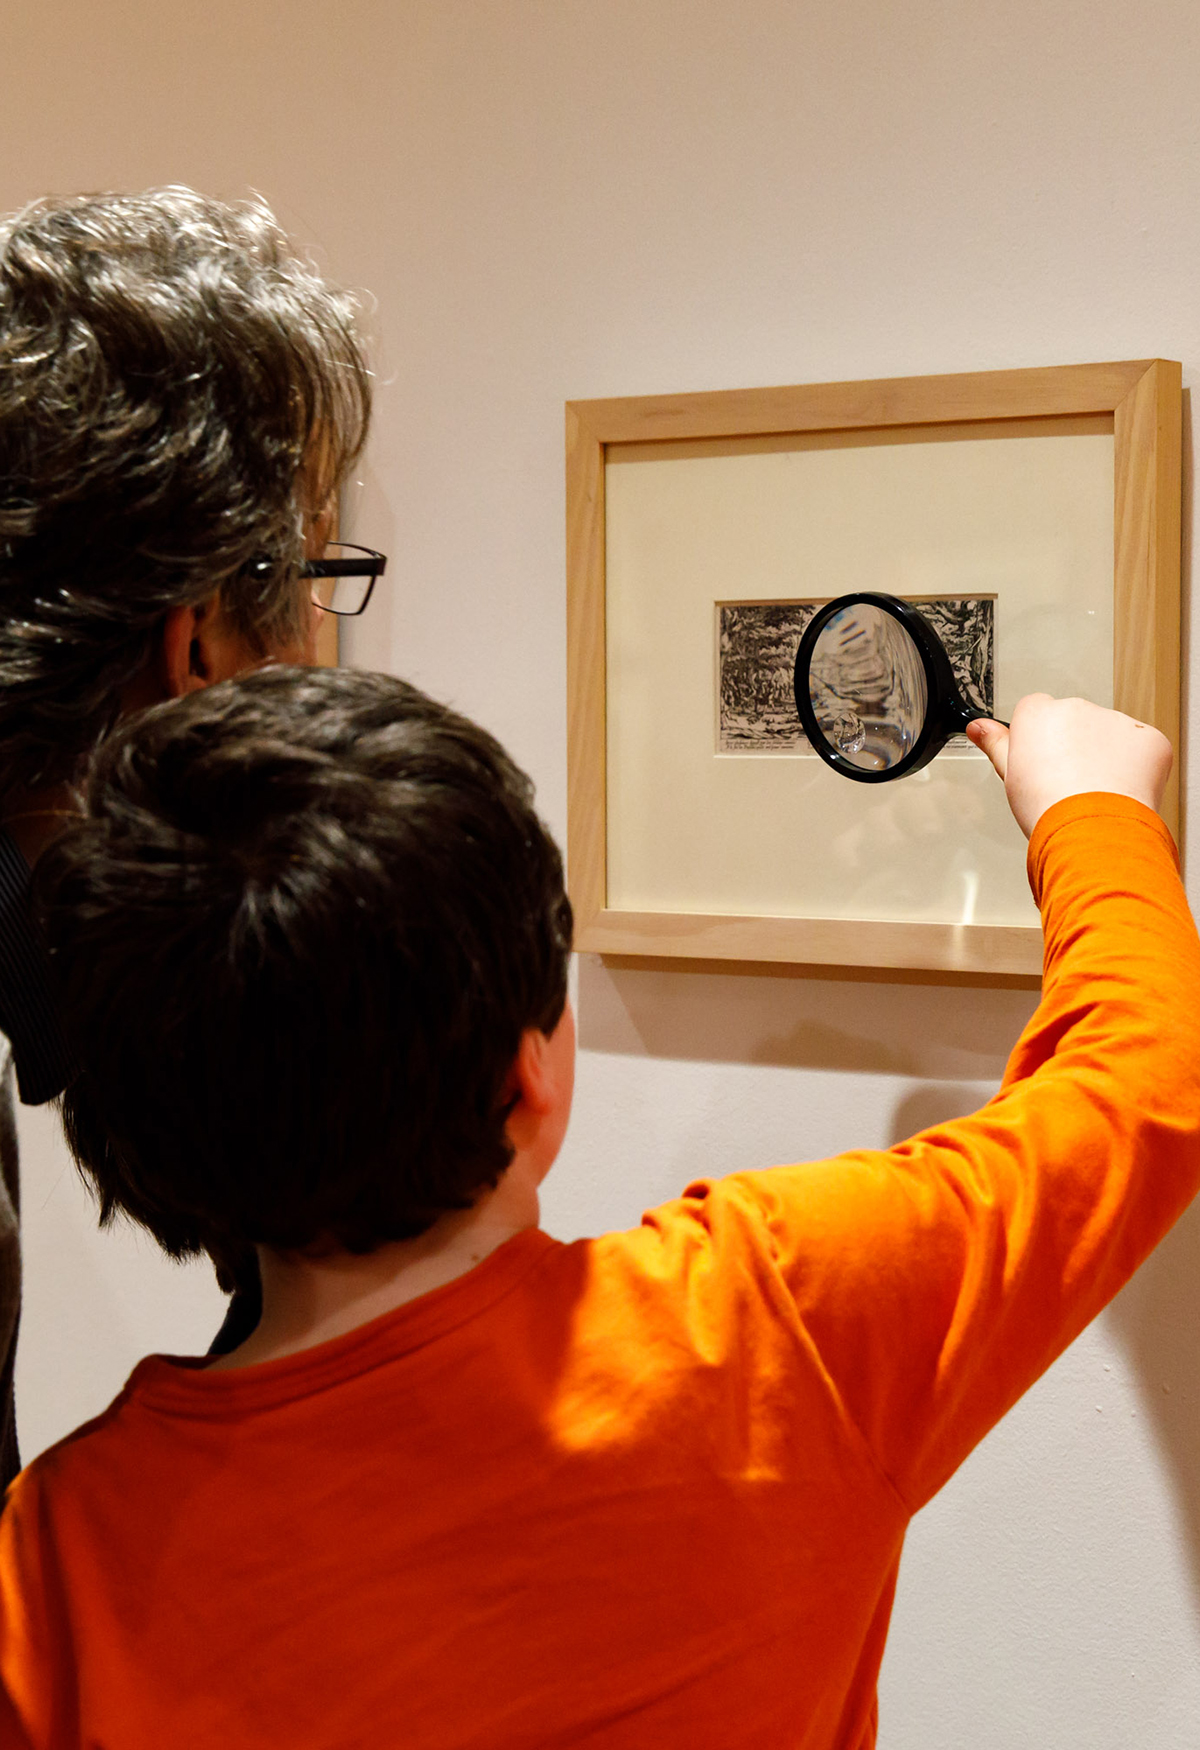 A man and boy look at a framed etching through a magnifying glass